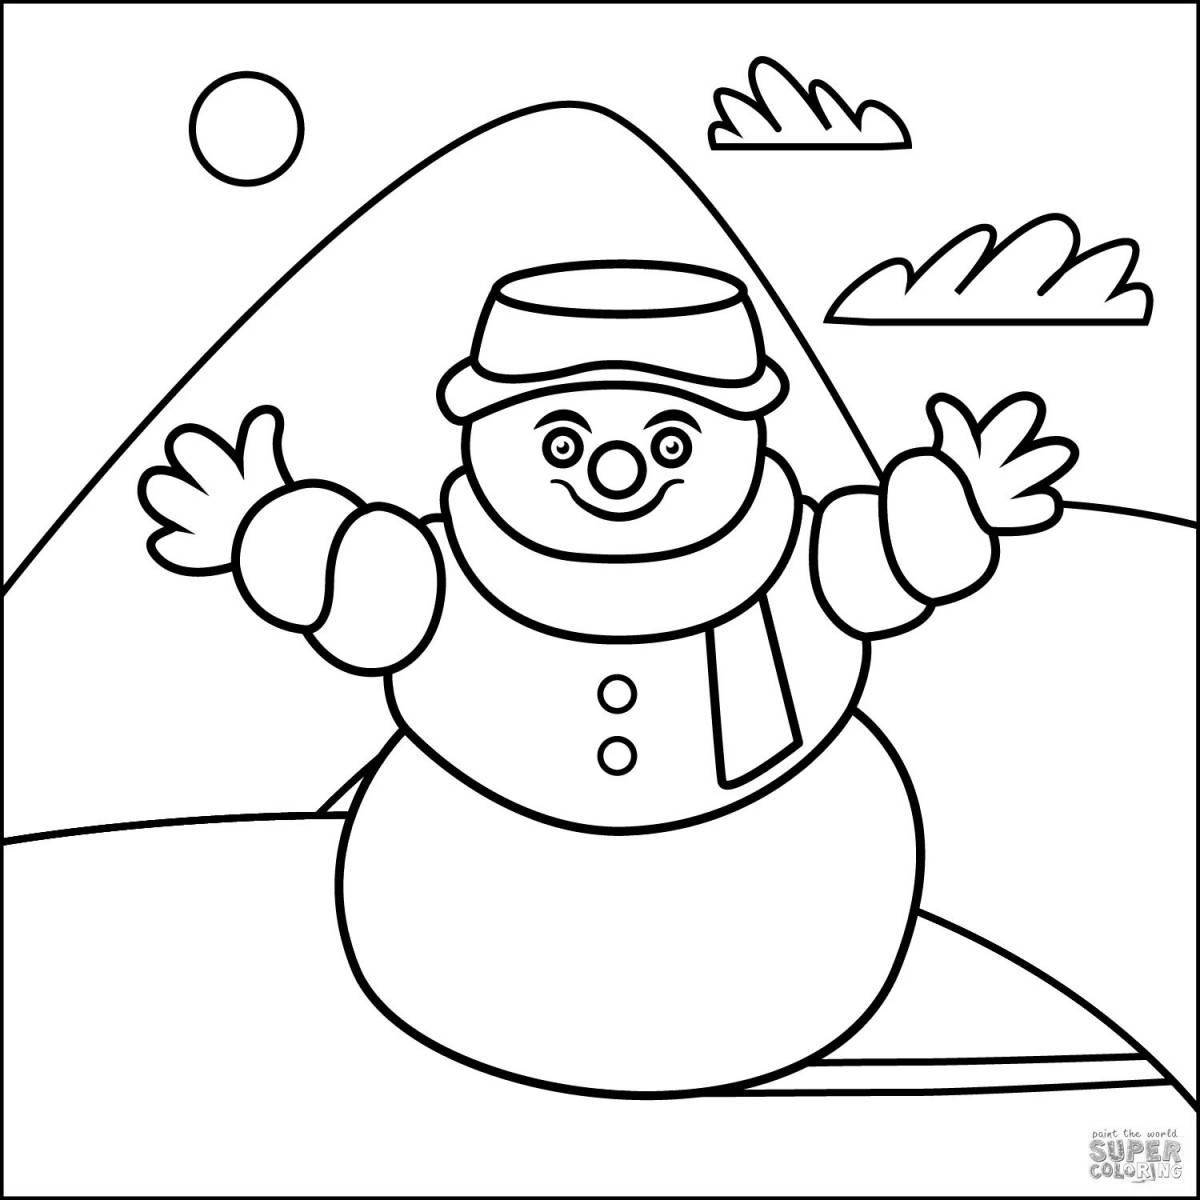 Great snowman coloring book for kids 2 3